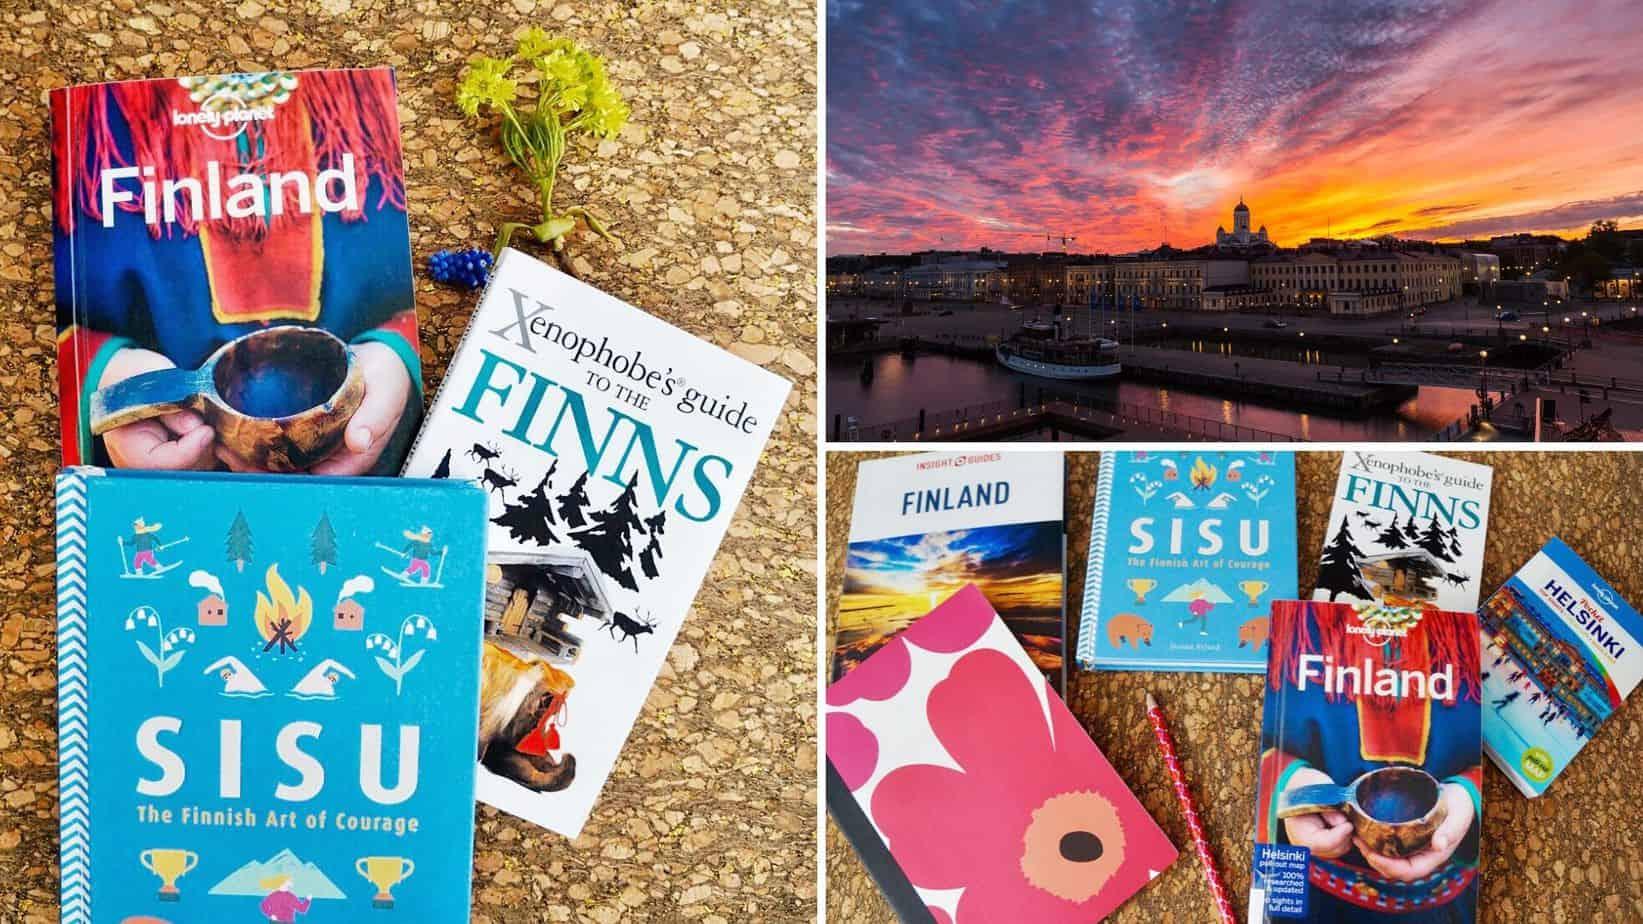 Best Finland Guide book - recommendations by Her Finland blog